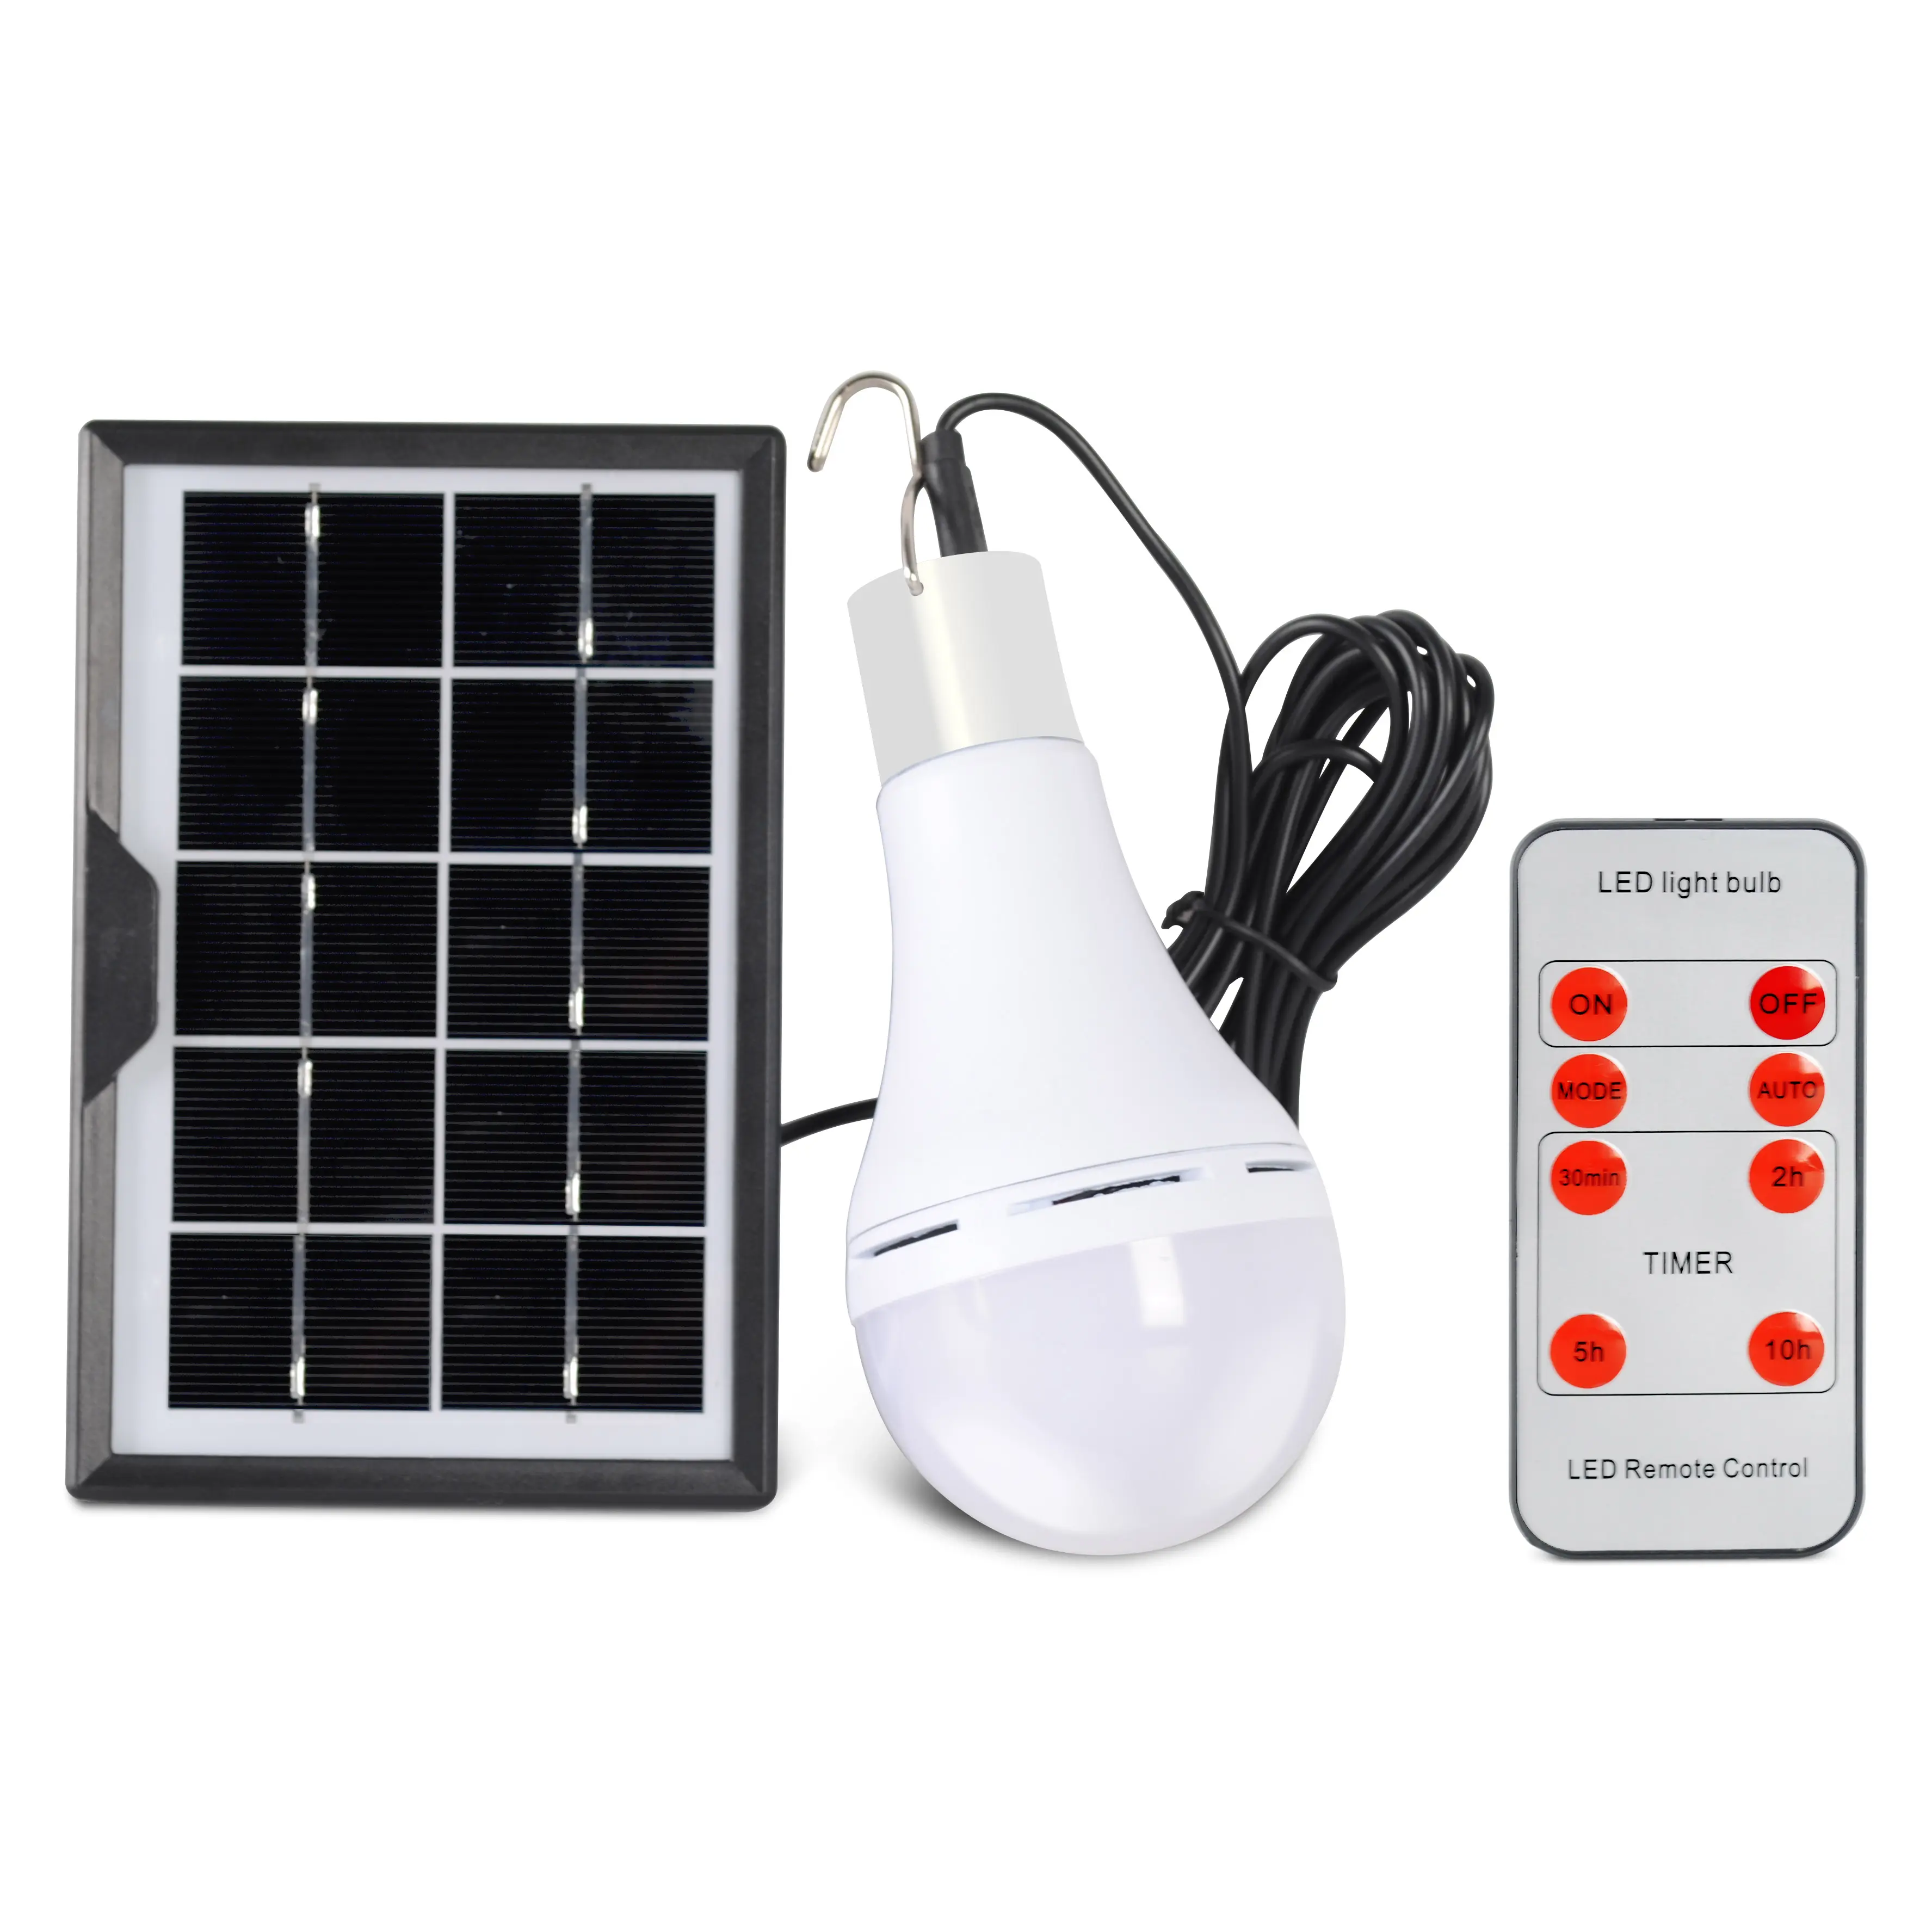 Rechargeable solar bulb 12W 350LM solar powered light with Remote Timer Lighting Sensor 4 Mode for Chicken Coops Hiking Camping